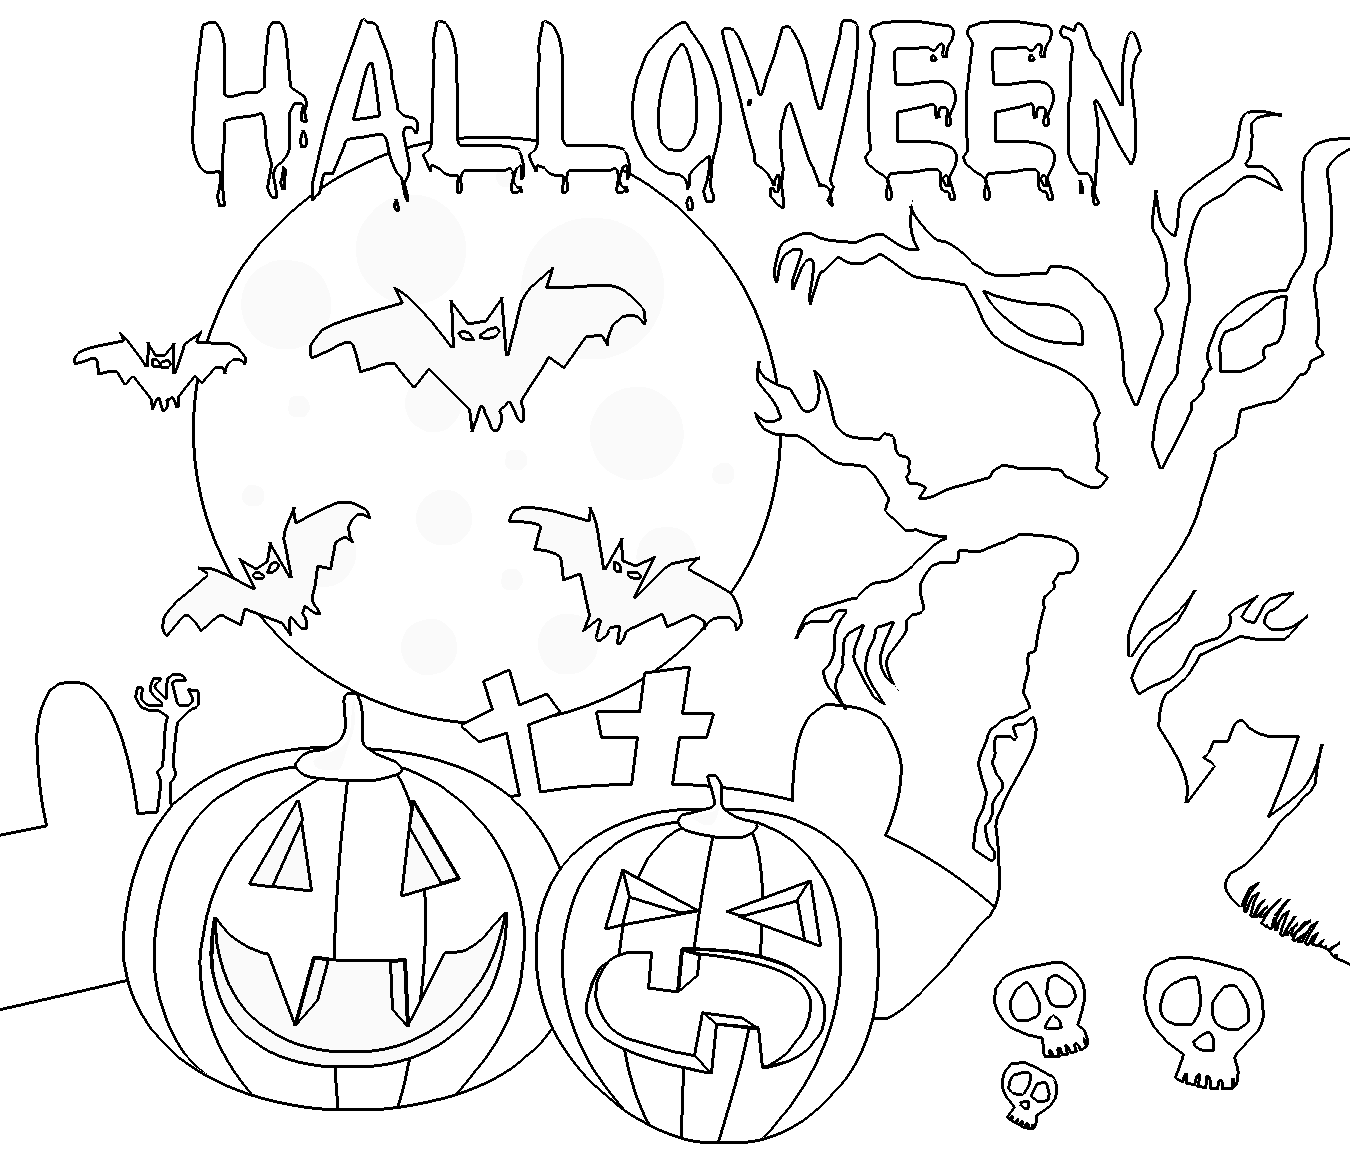 Download Halloween (Holidays and Special occasions) - Page 4 - Printable coloring pages